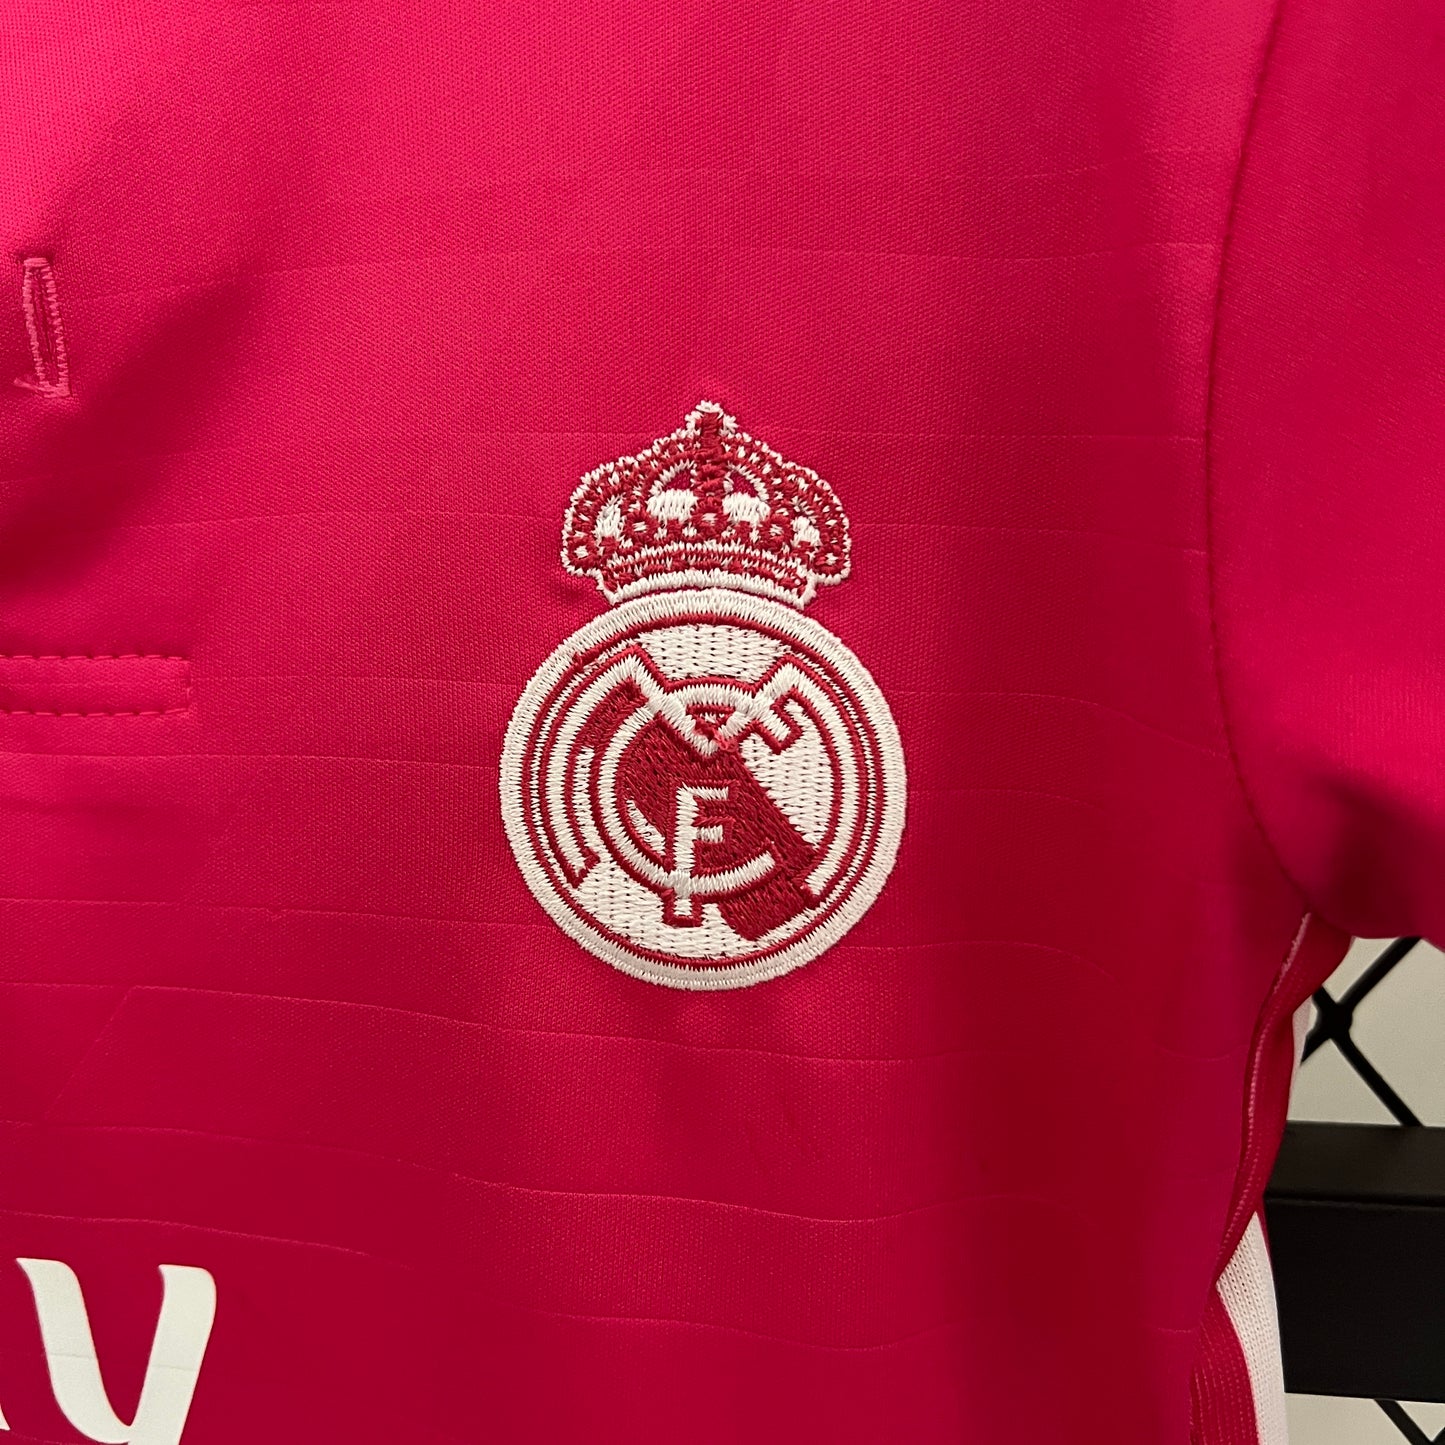 REAL MADRID 2014 - 2015 AWAY JERSEY FOR CHILDREN